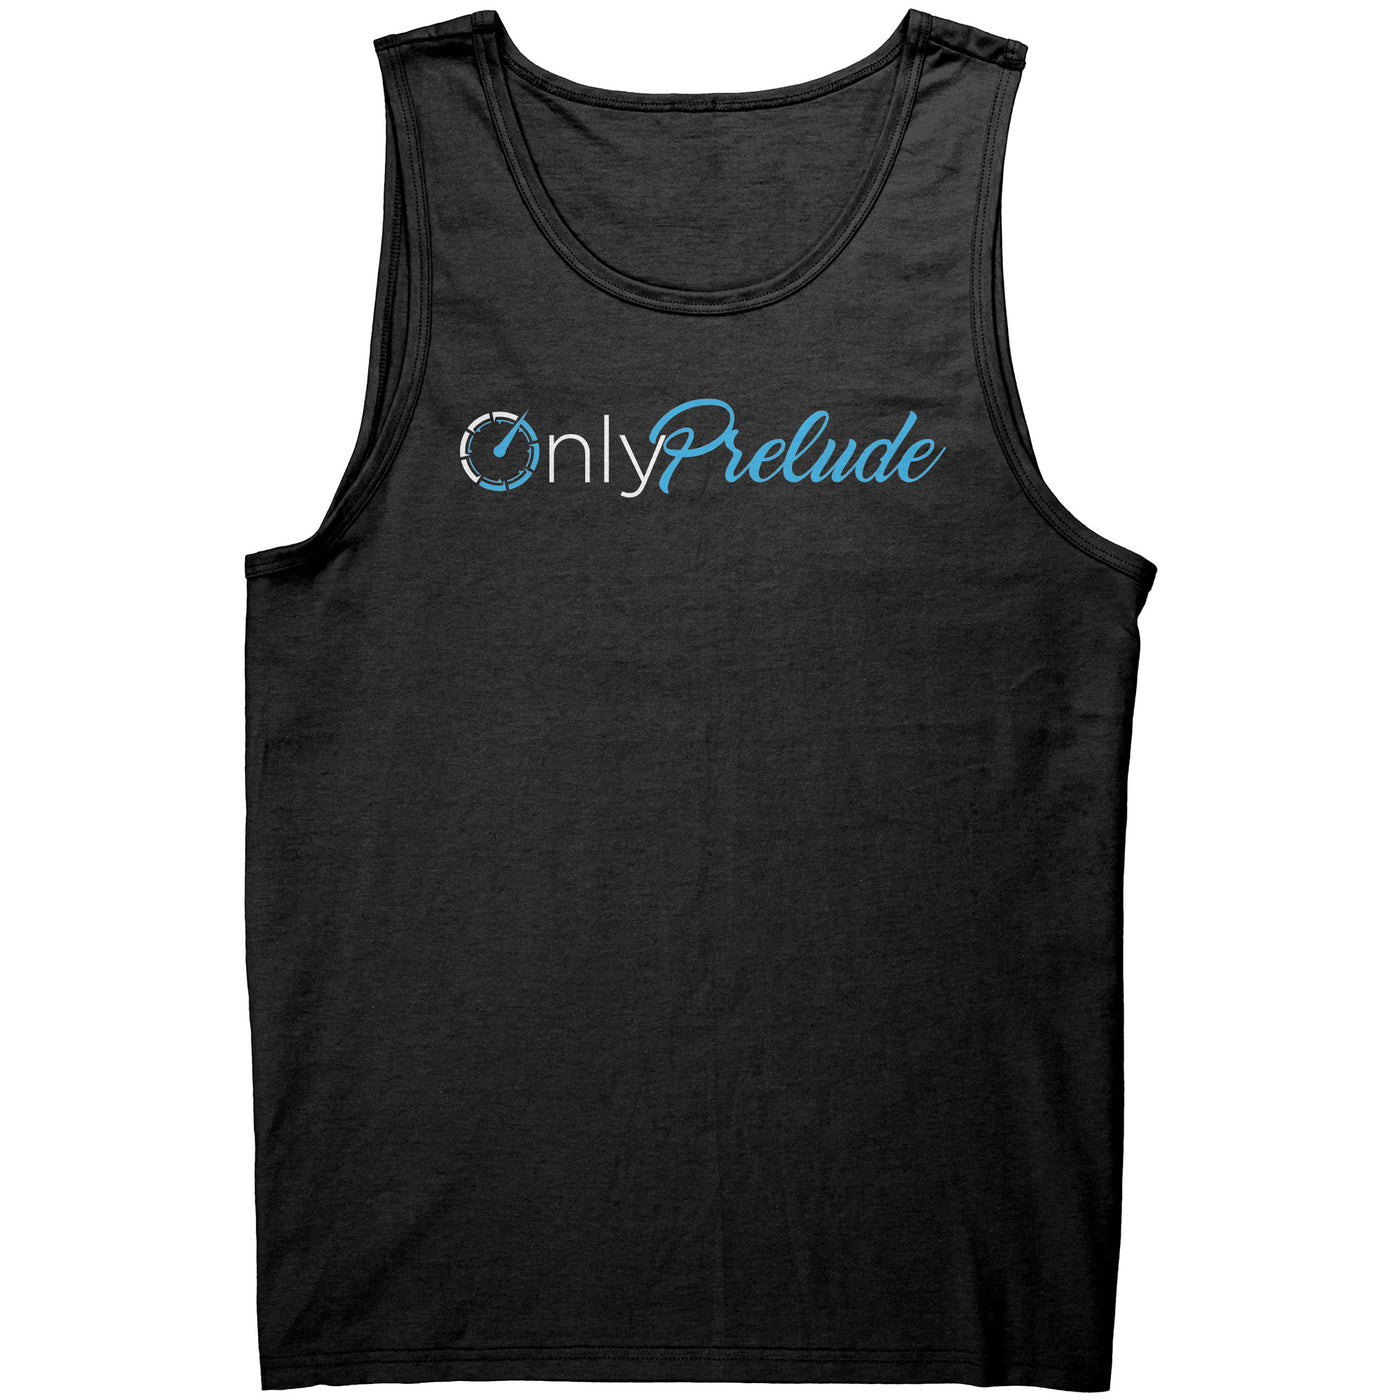 Only Prelude Men's Tank